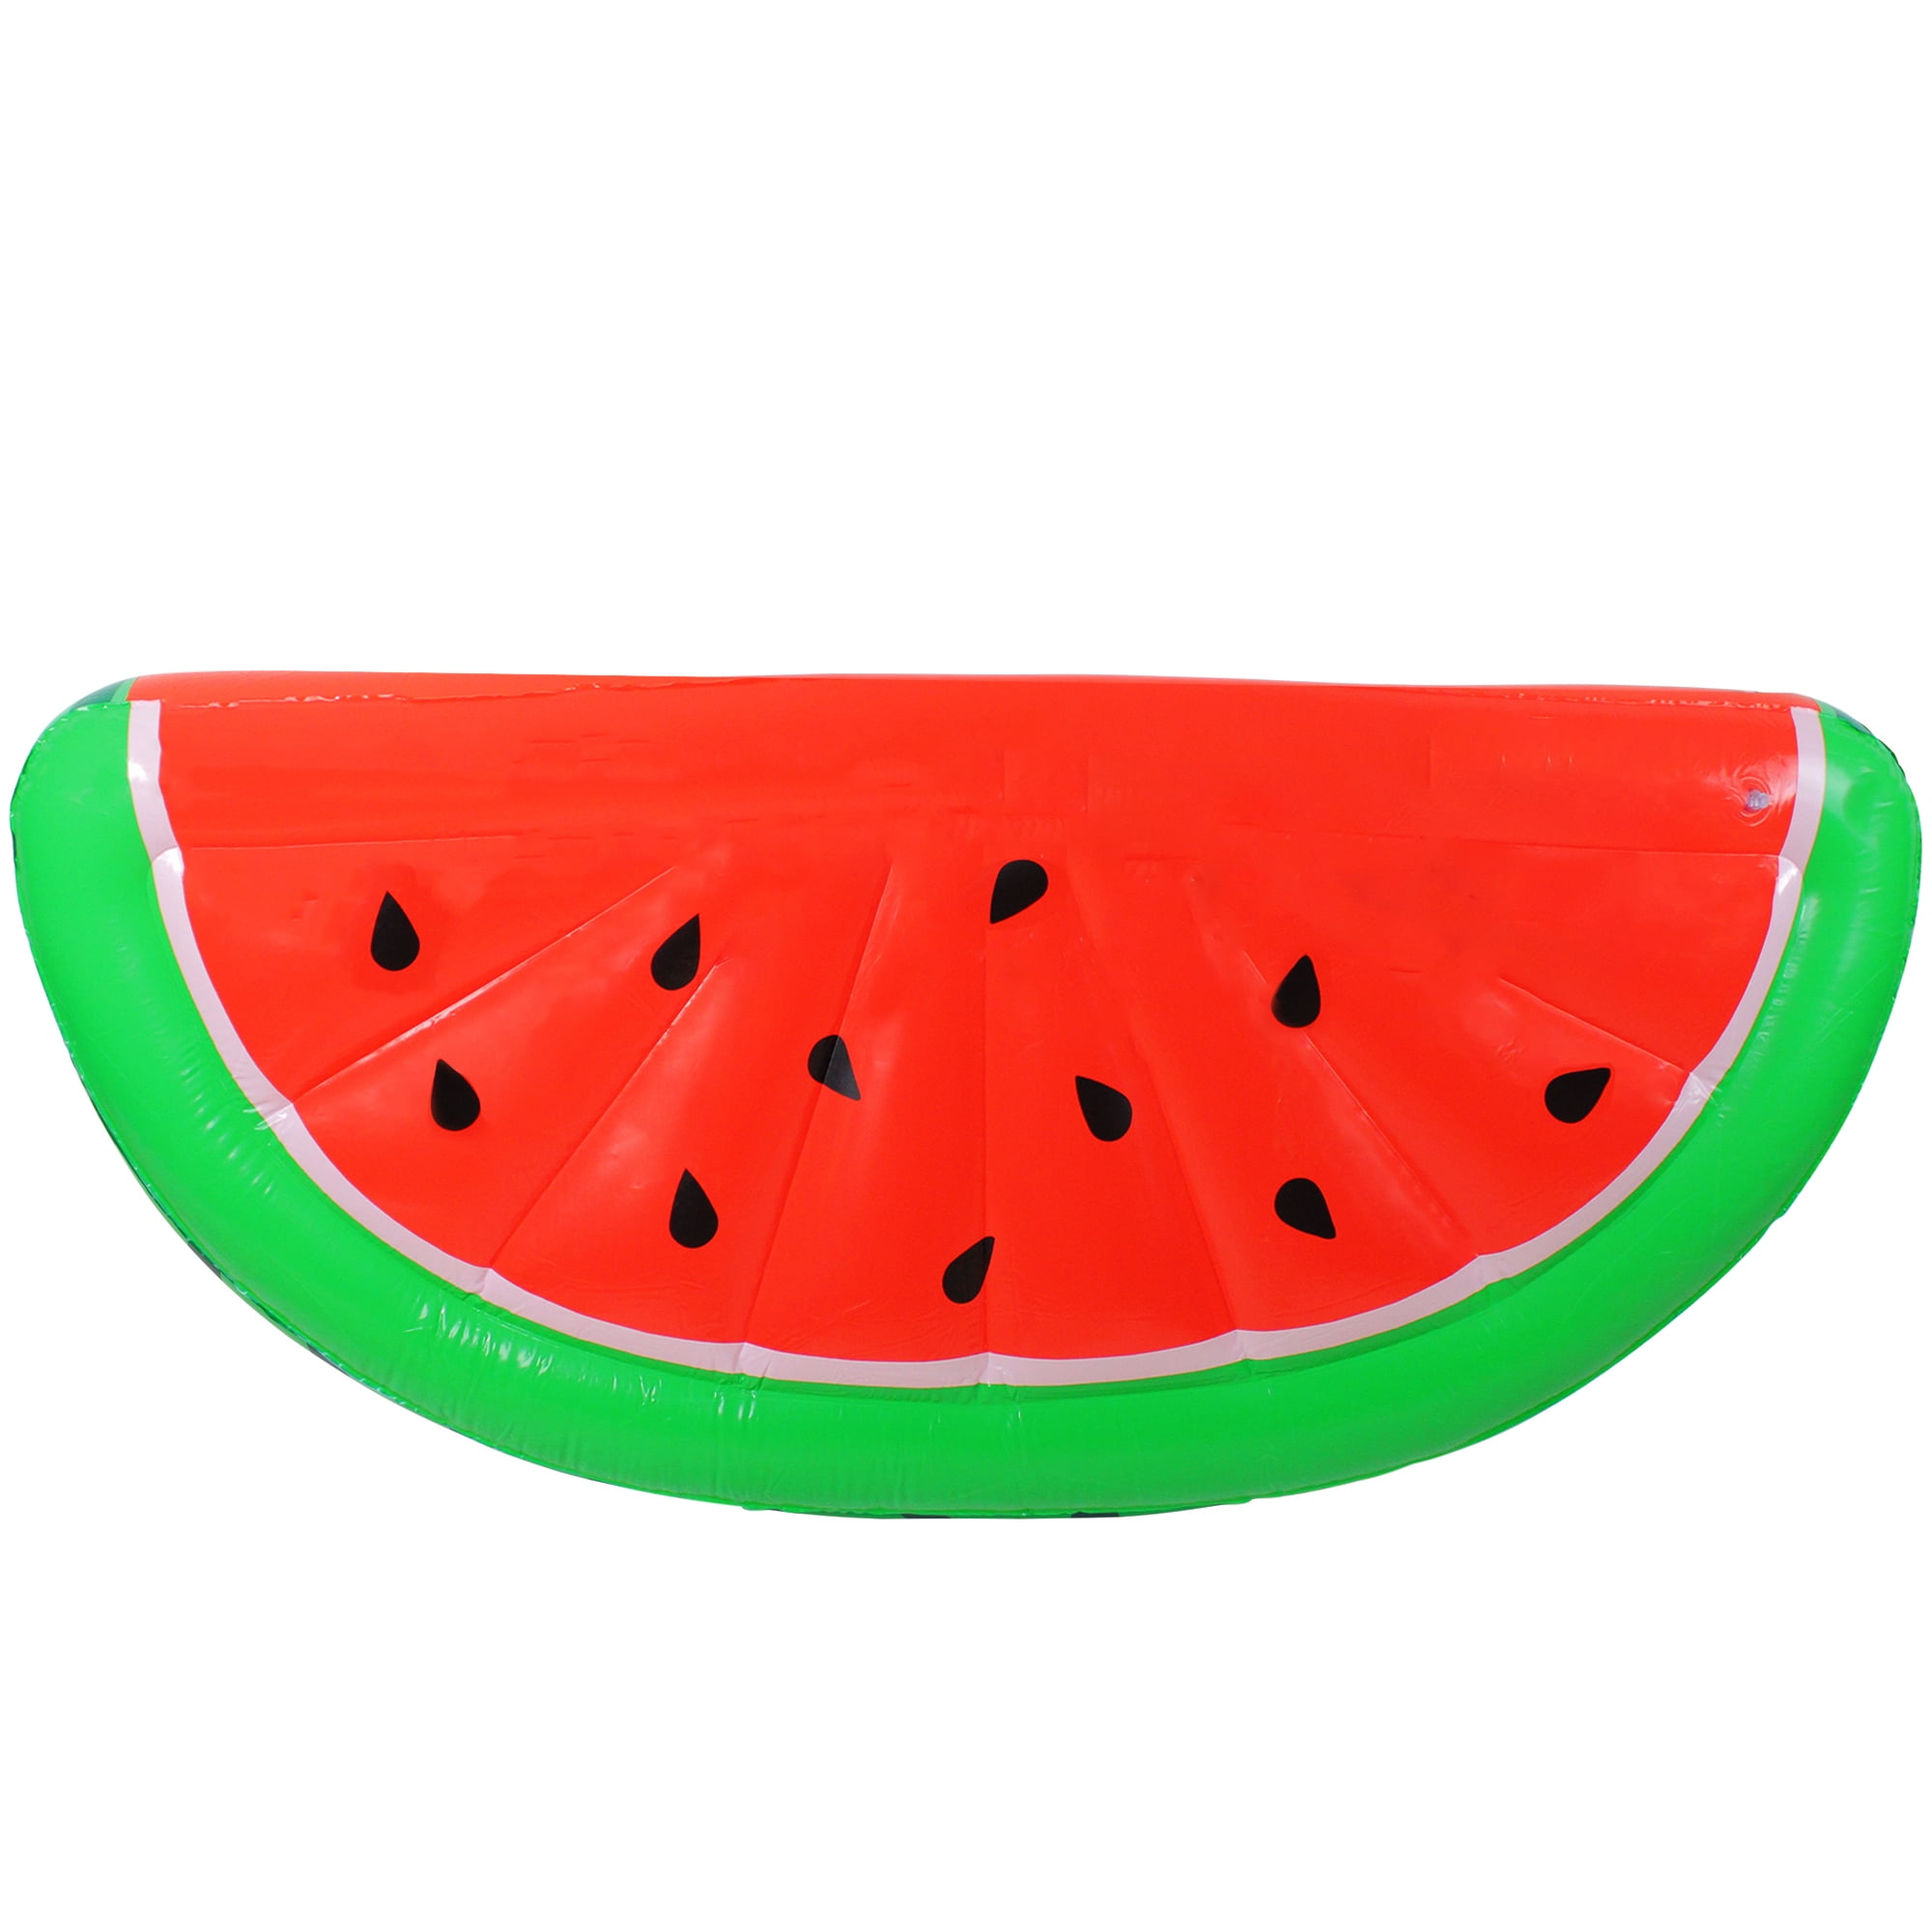 NOVELTY INFLATABLE LARGE WATER MELON LARGE SEAT CUSHION 